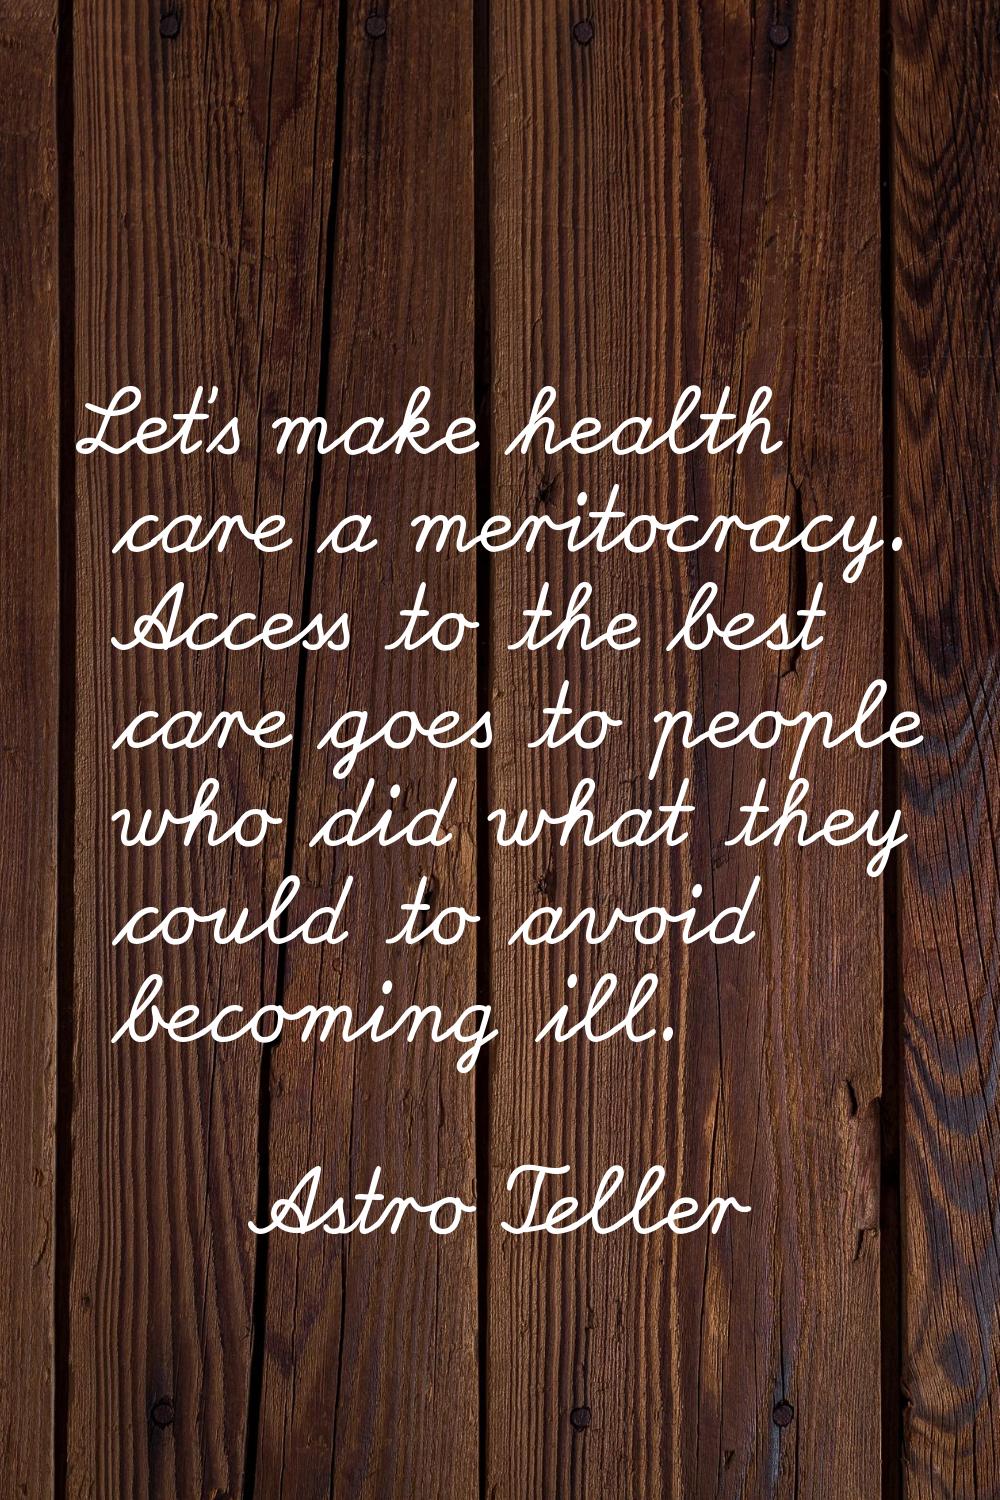 Let's make health care a meritocracy. Access to the best care goes to people who did what they coul